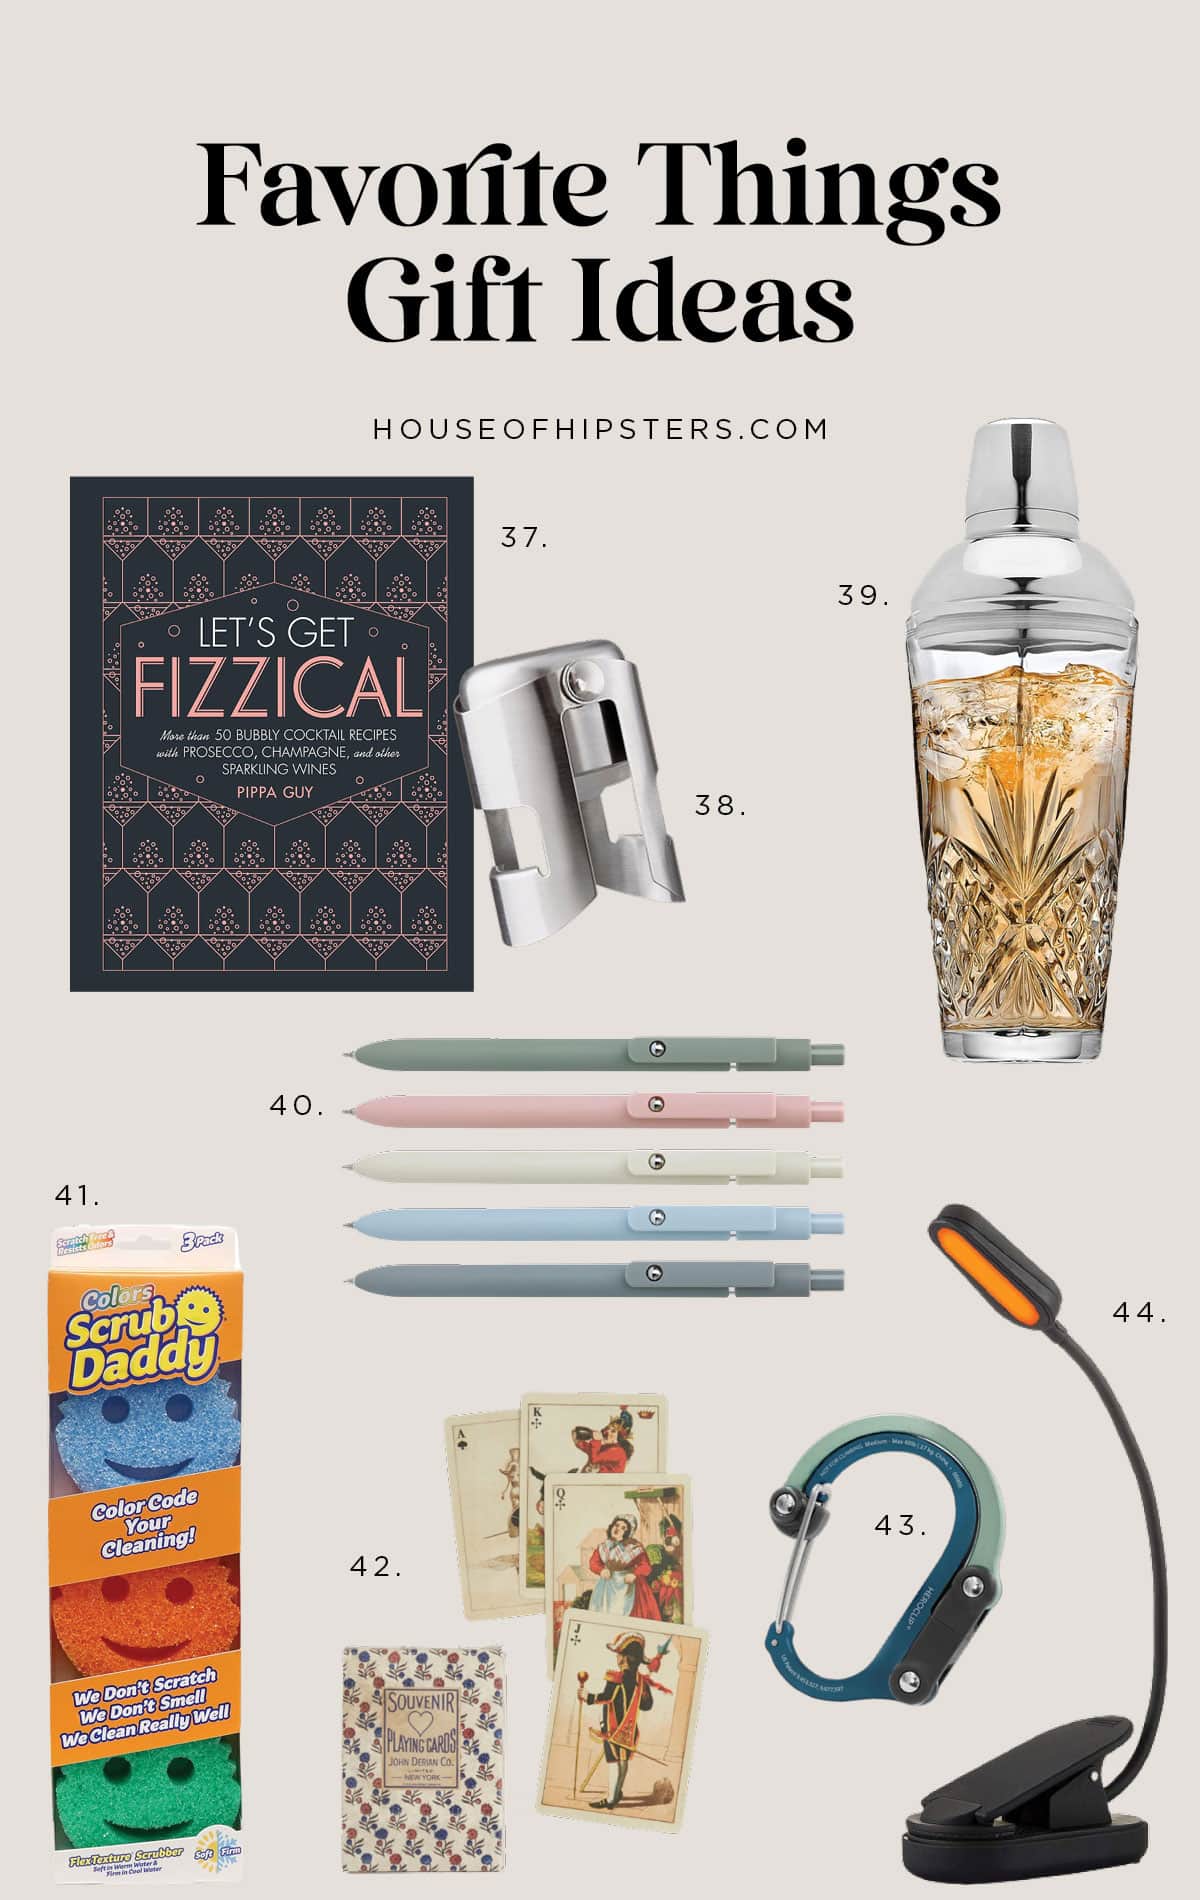 Gift Ideas for Your Next Favorite Things Party